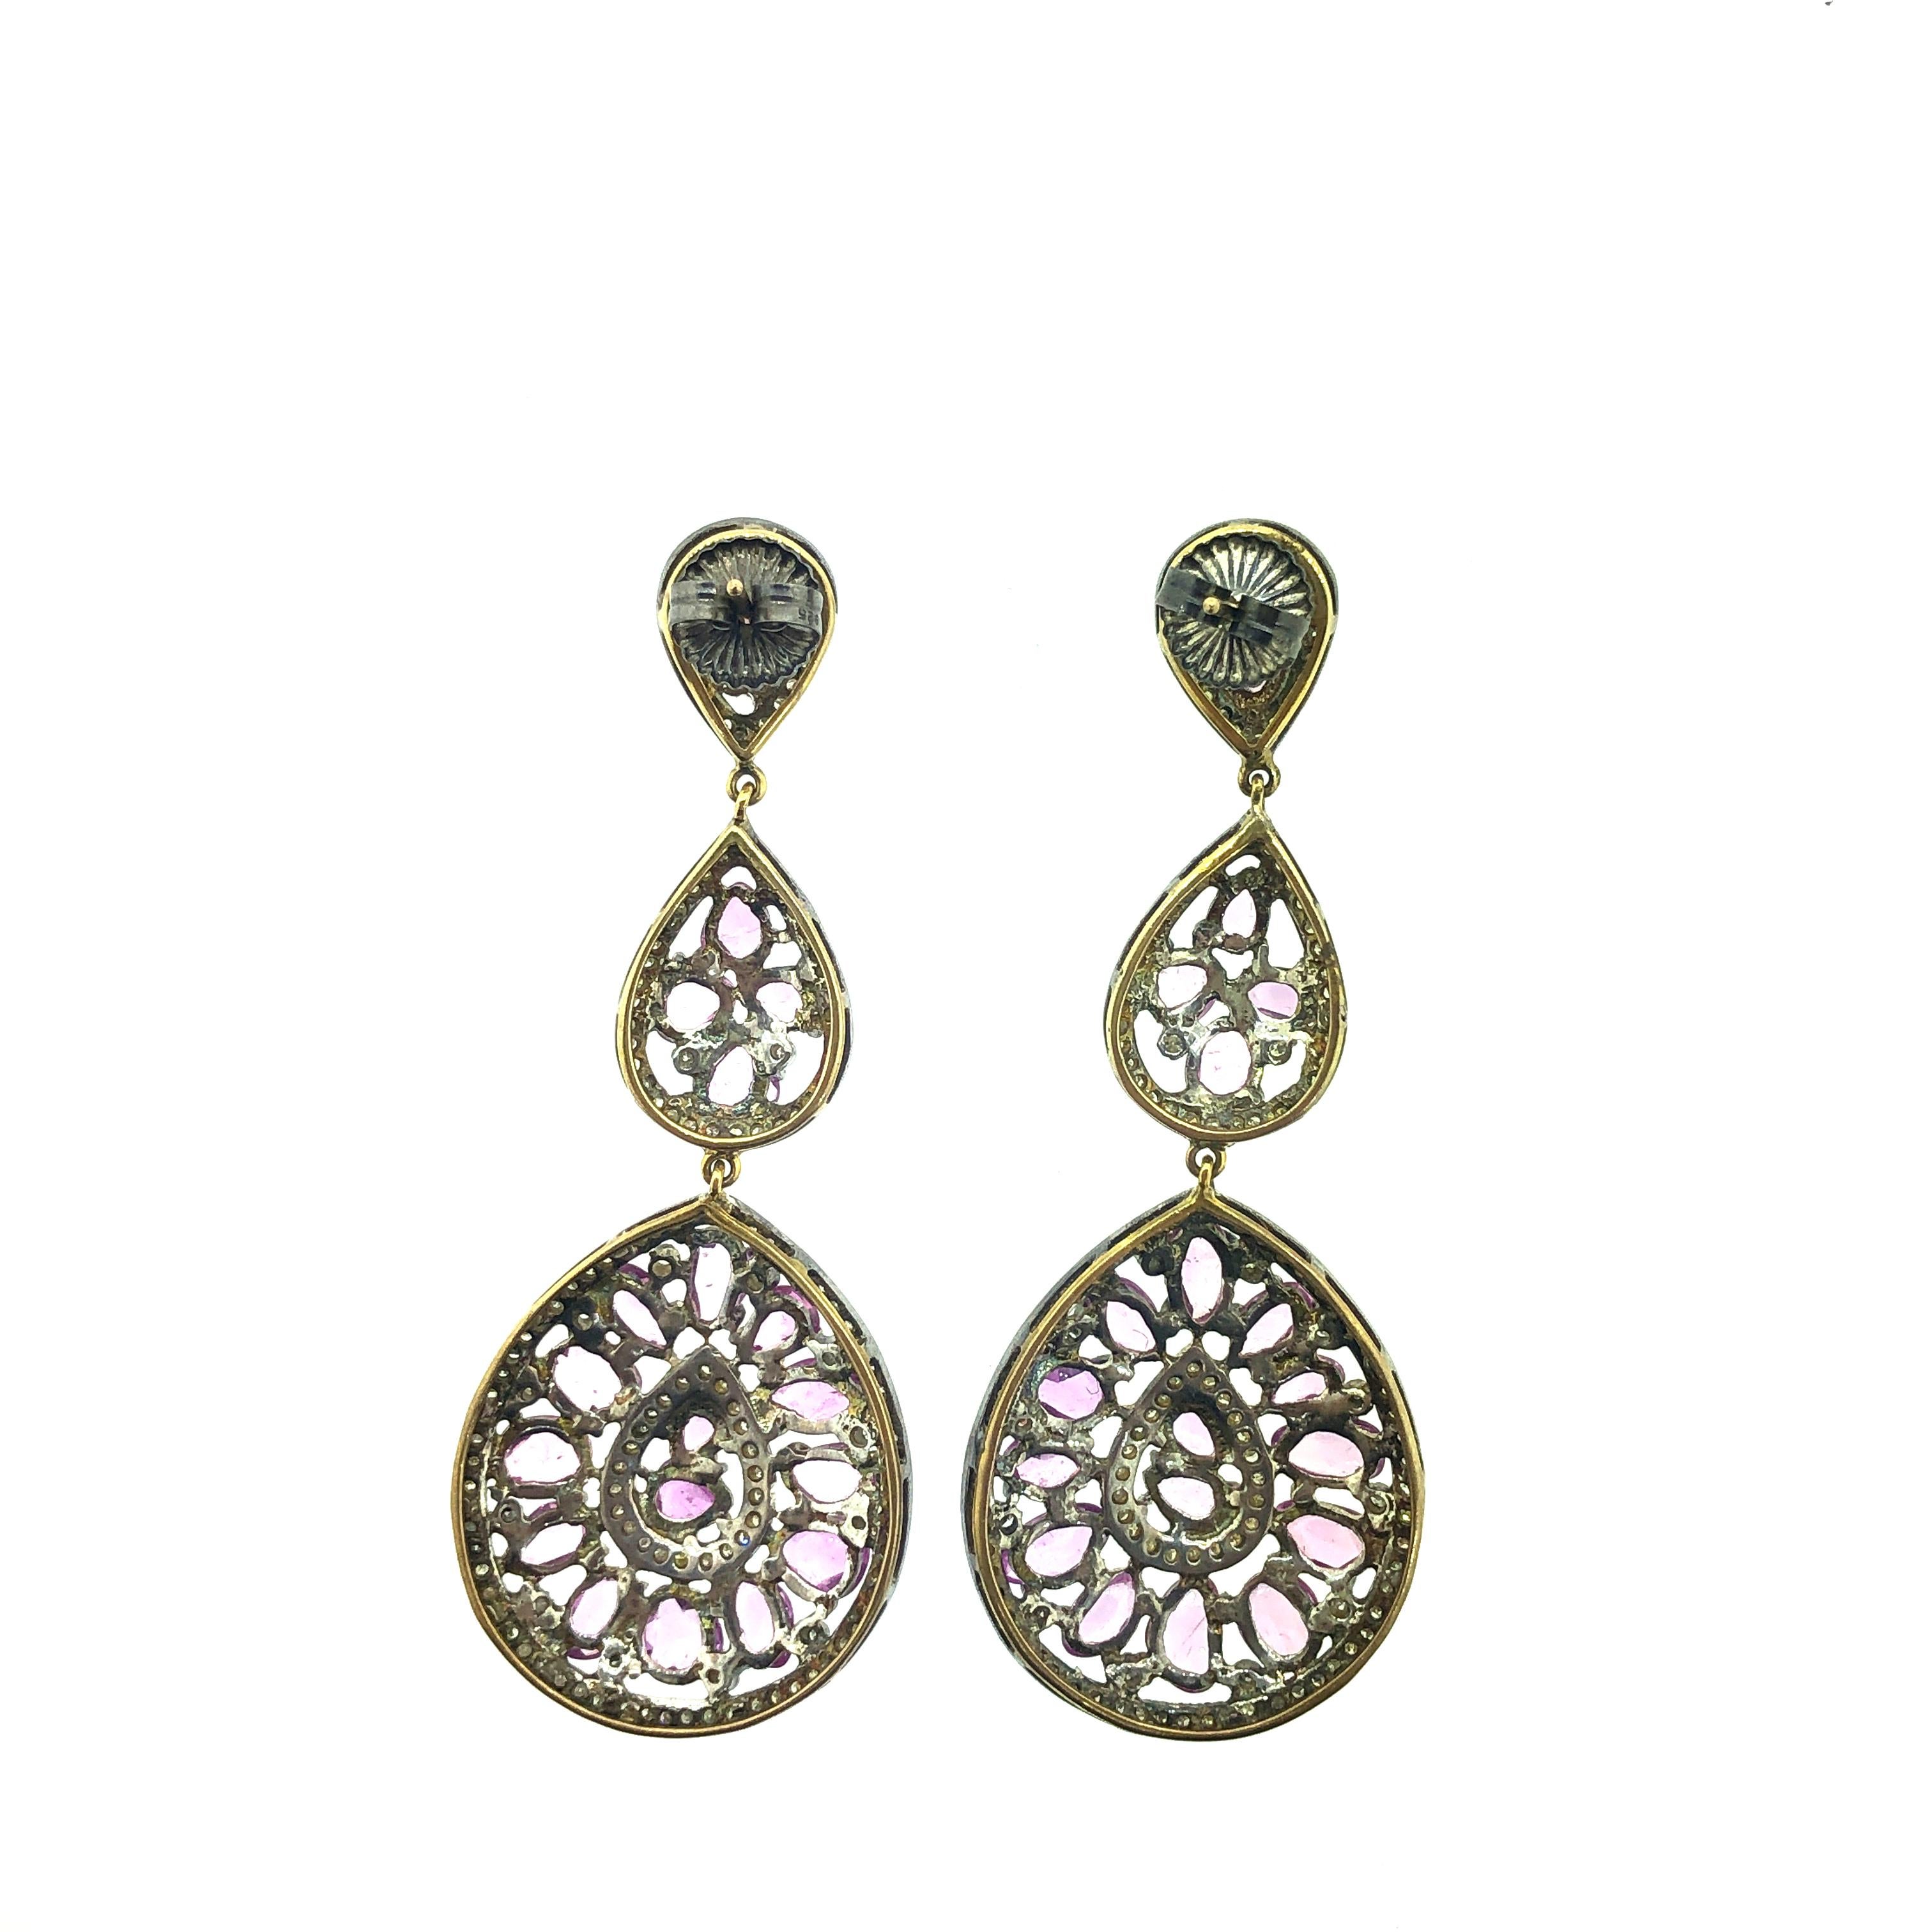 20.01 Carat Pink Sapphire, Diamond Earring Oxidized Sterling Silver, 14K Gold In New Condition For Sale In New York, NY